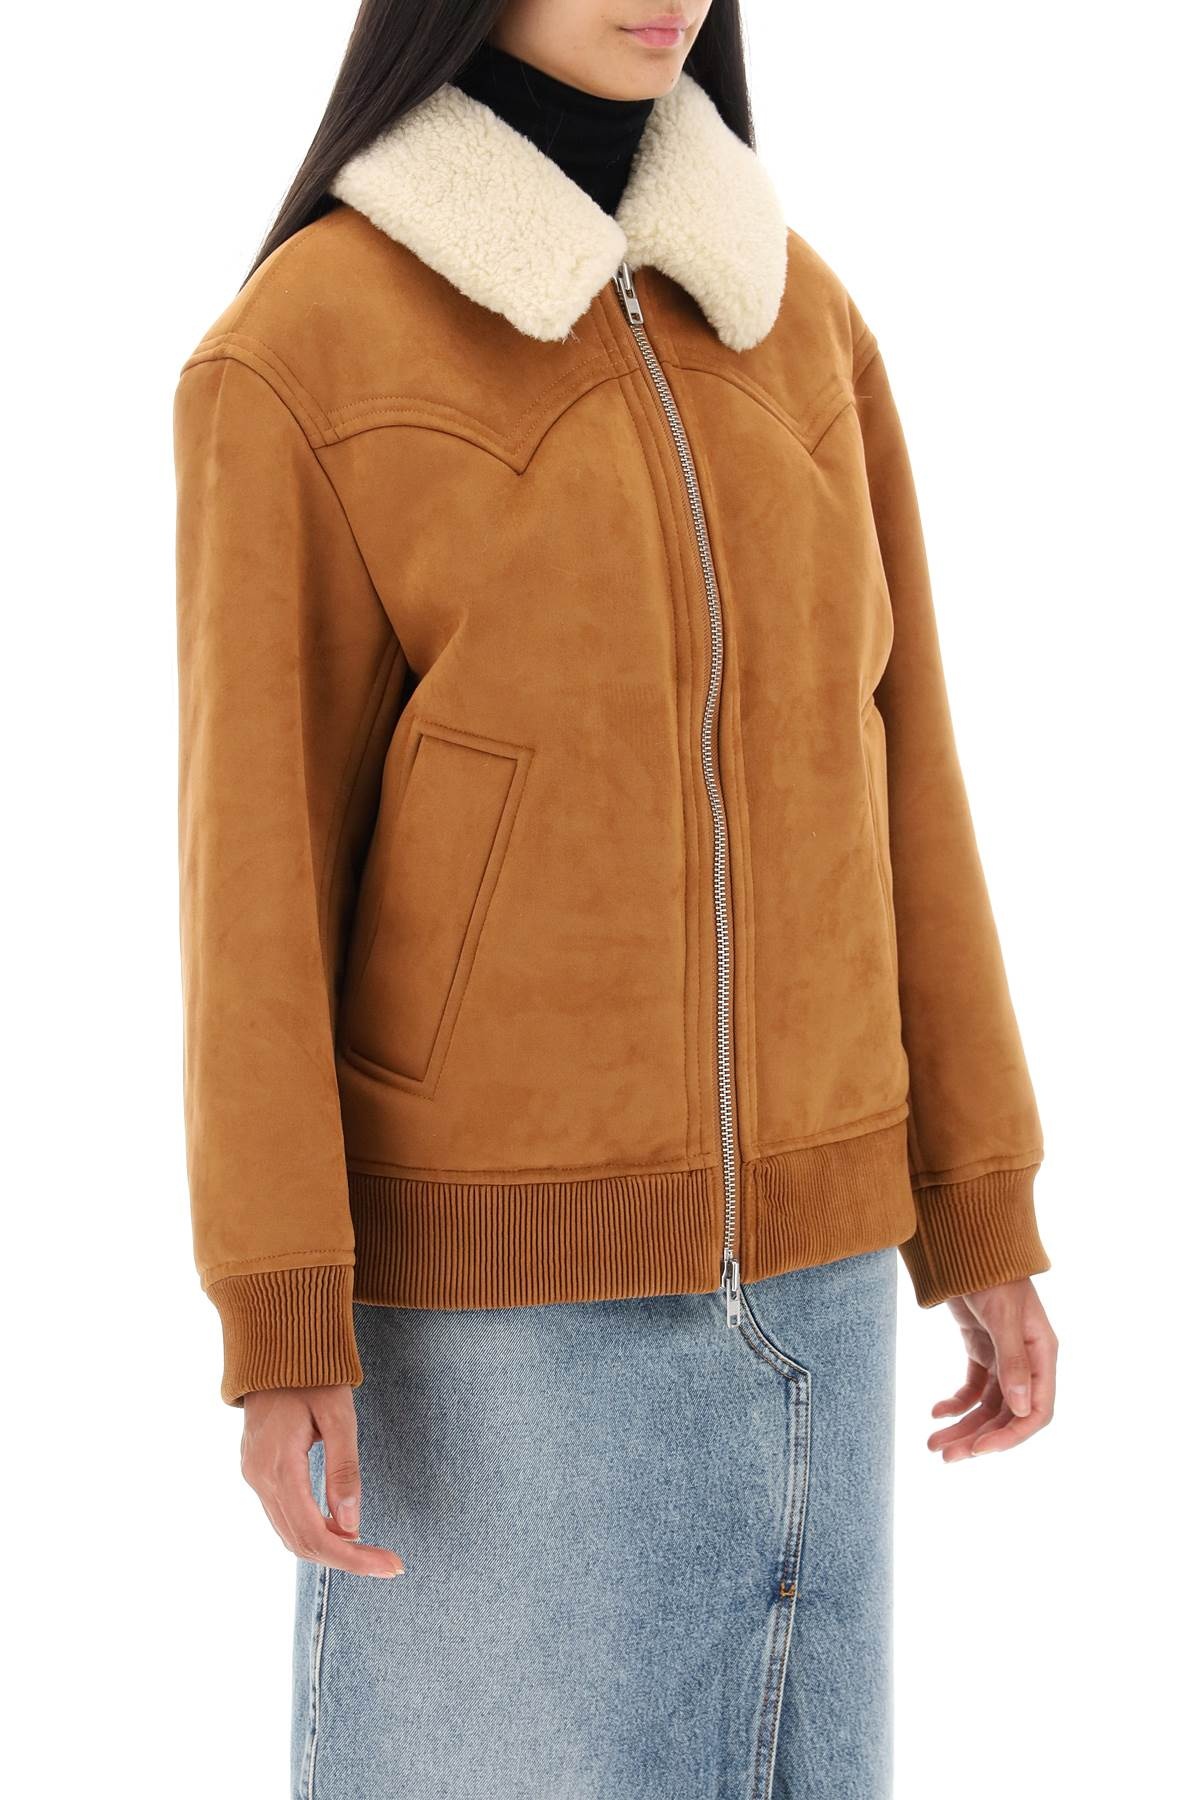 Stand Studio Lillee Eco-Shearling Bomber Jacket Women - 2